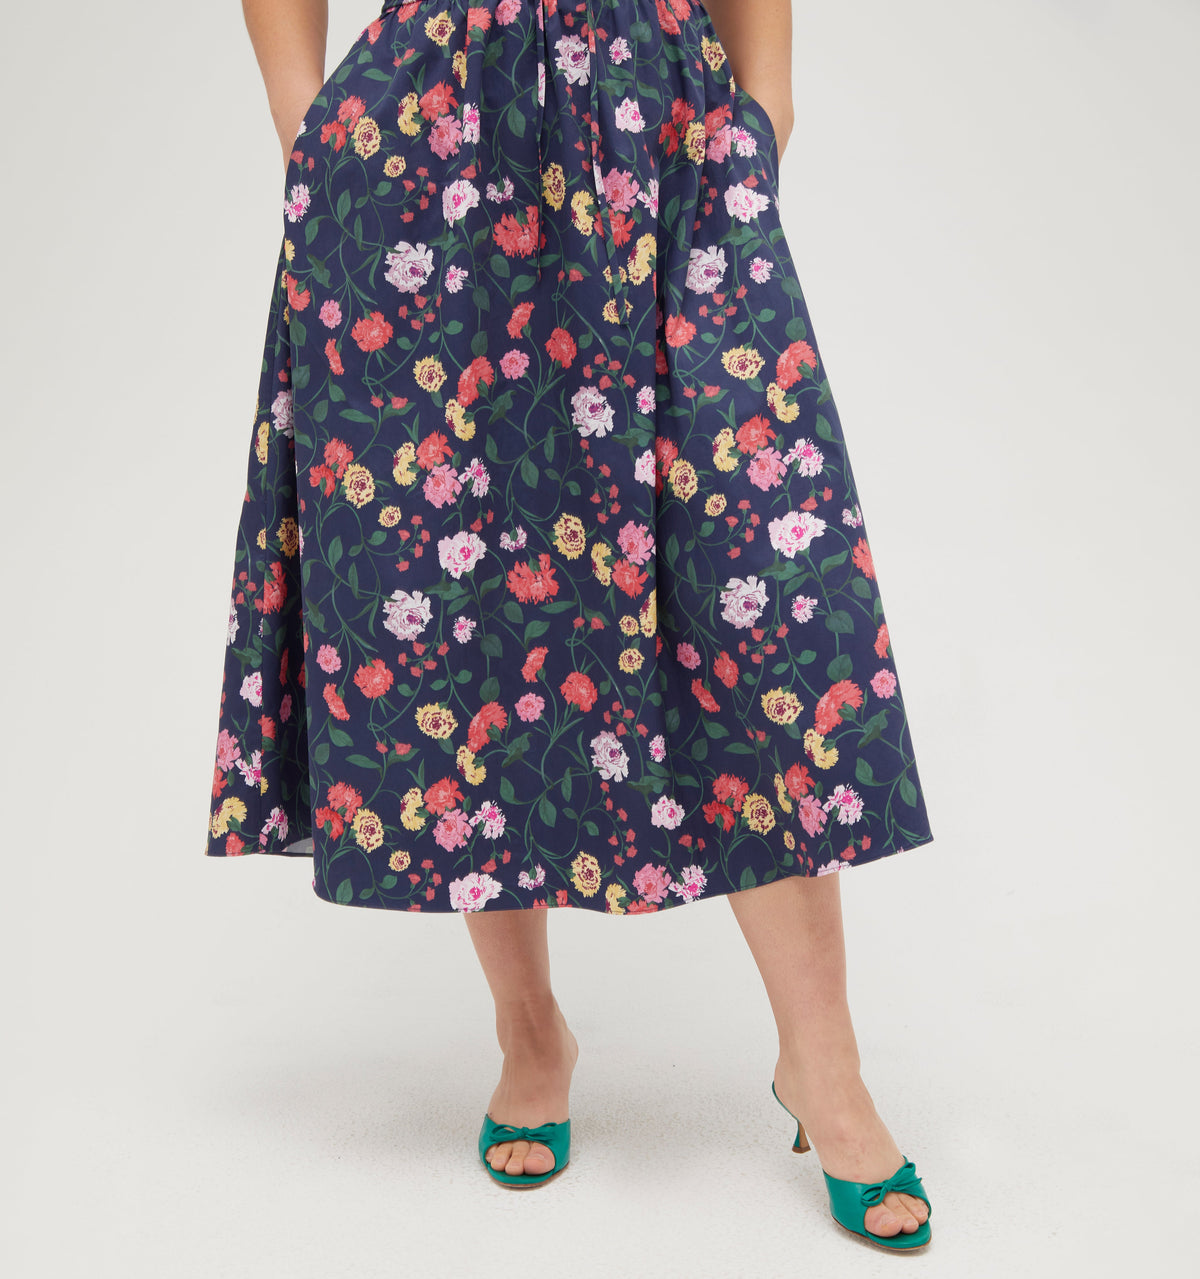 Anna is 5’8” and wears a size L in the Navy Peony Bouquet Cotton Sateen color: Navy Peony Bouquet Cotton Sateen